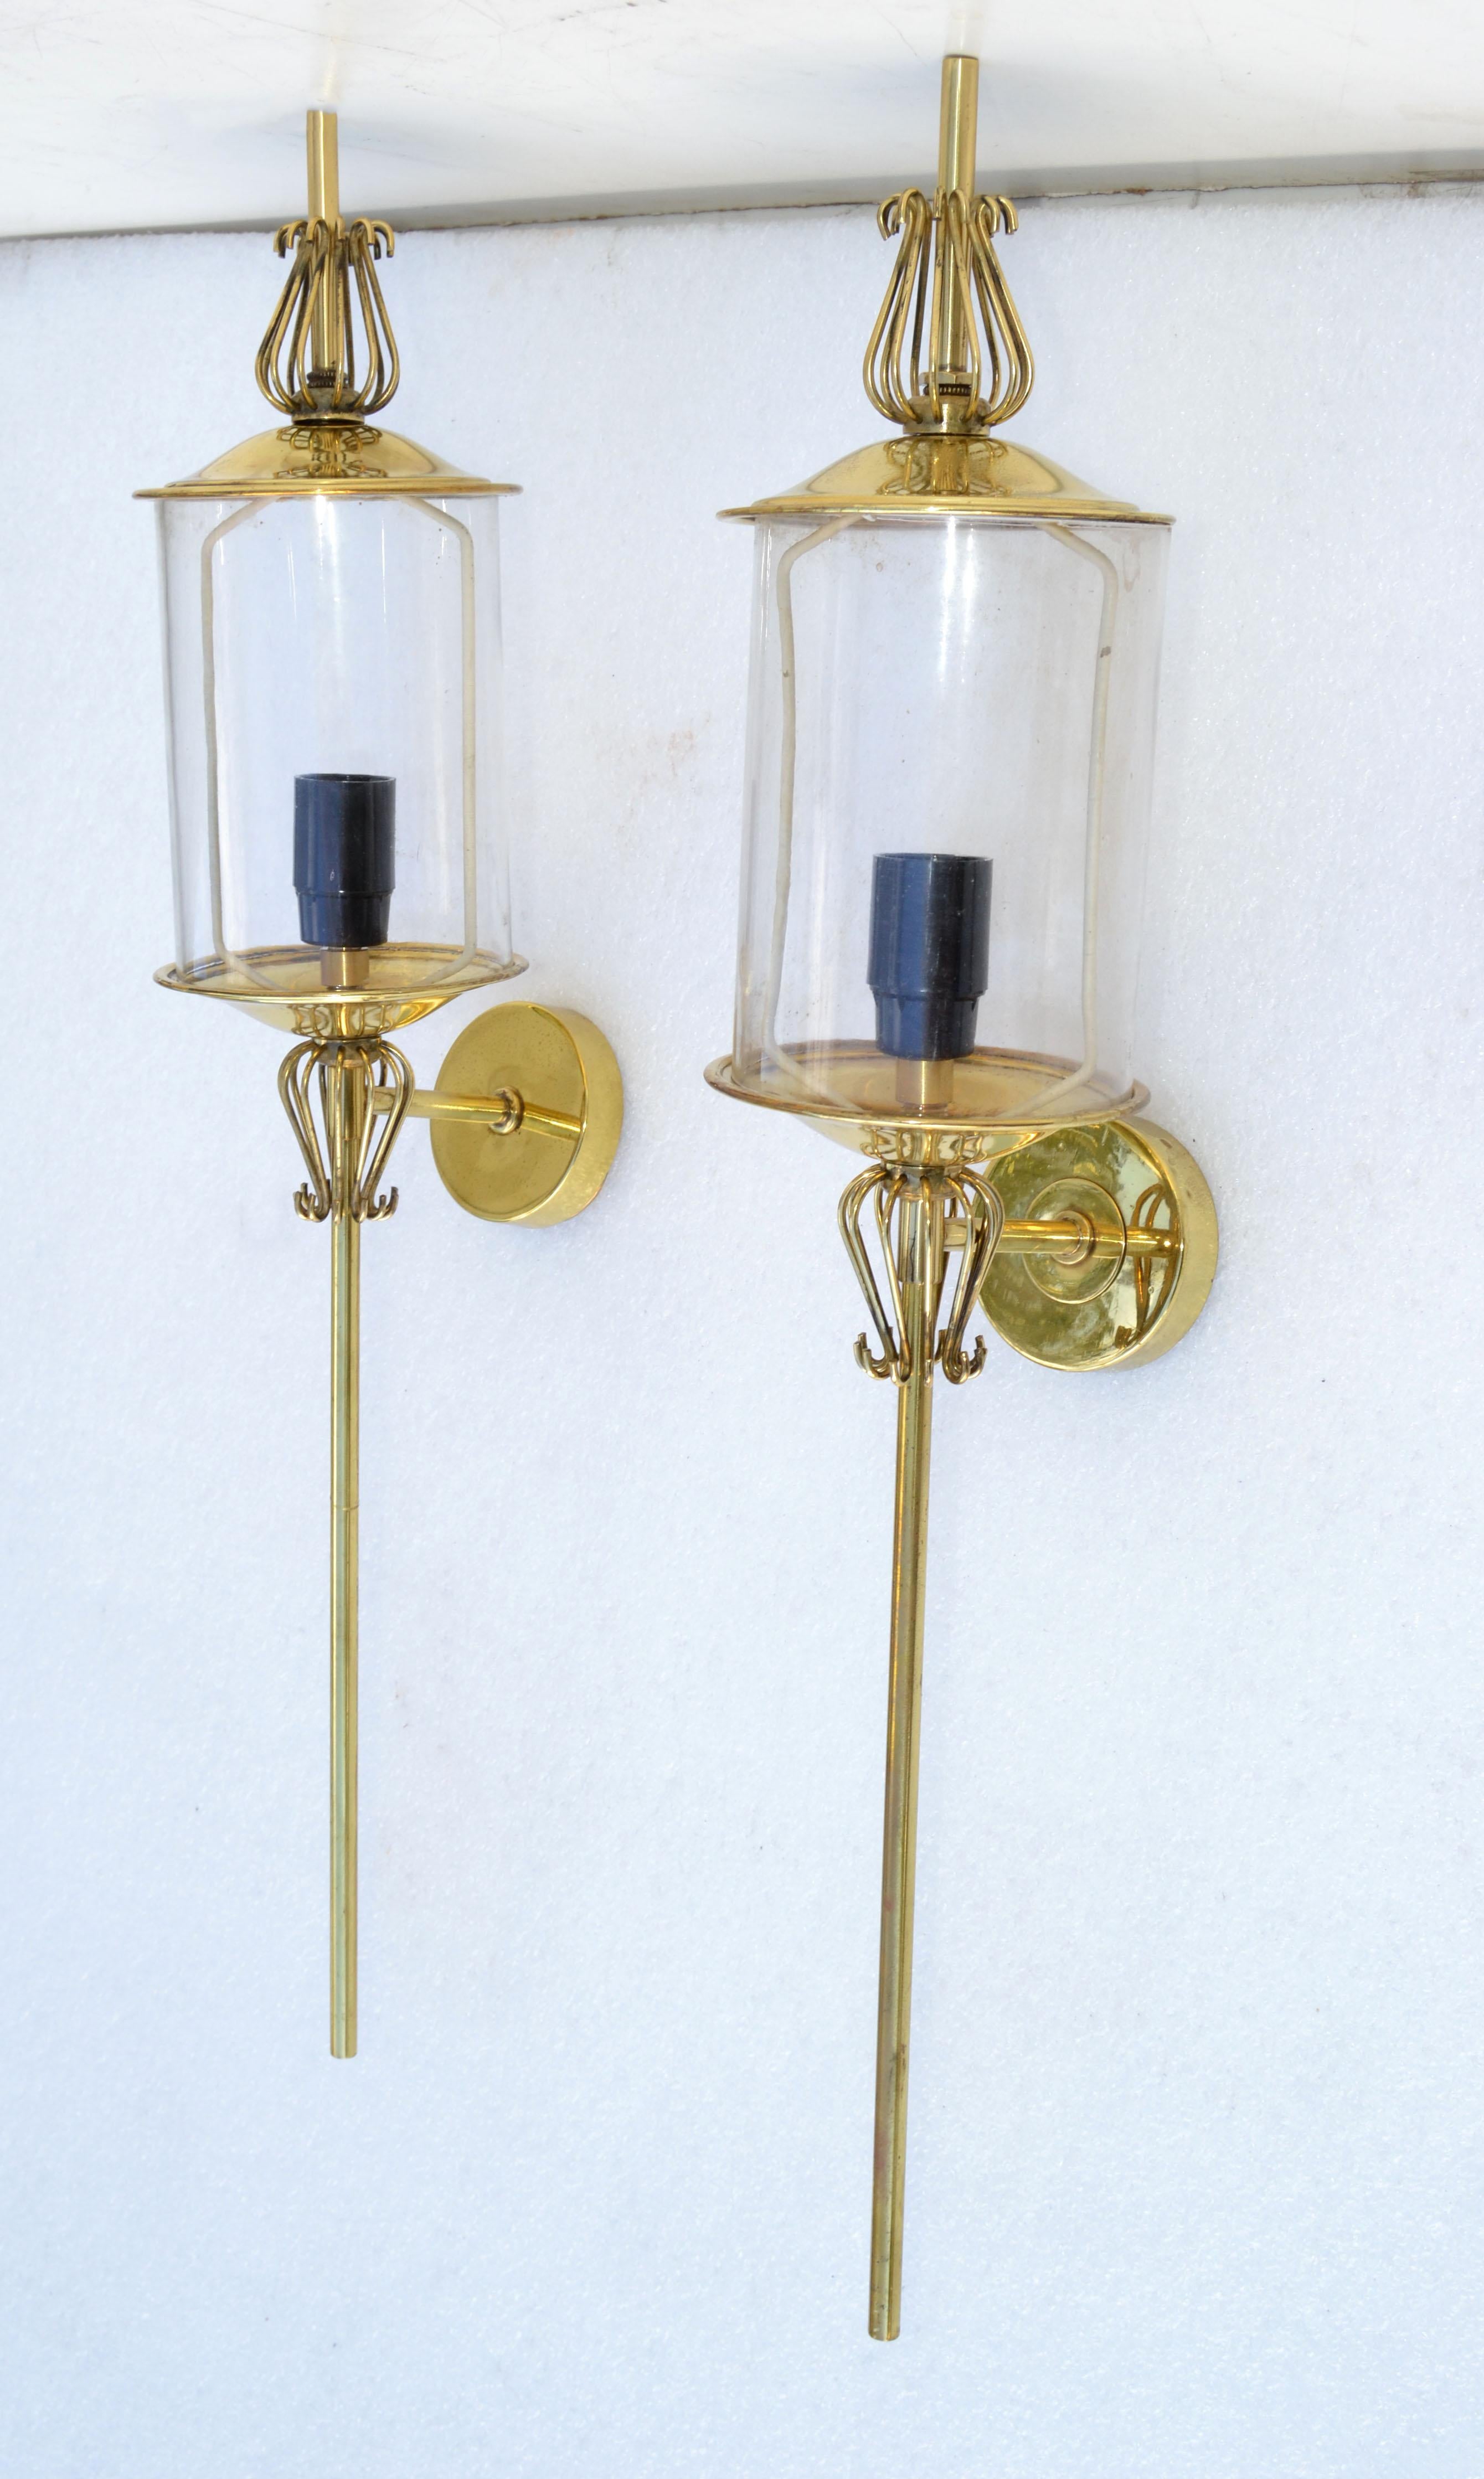 Mid-20th Century Pair of Maison Lunel Brass & Glass Sconces, Wall Lamp French Mid-Century Modern For Sale